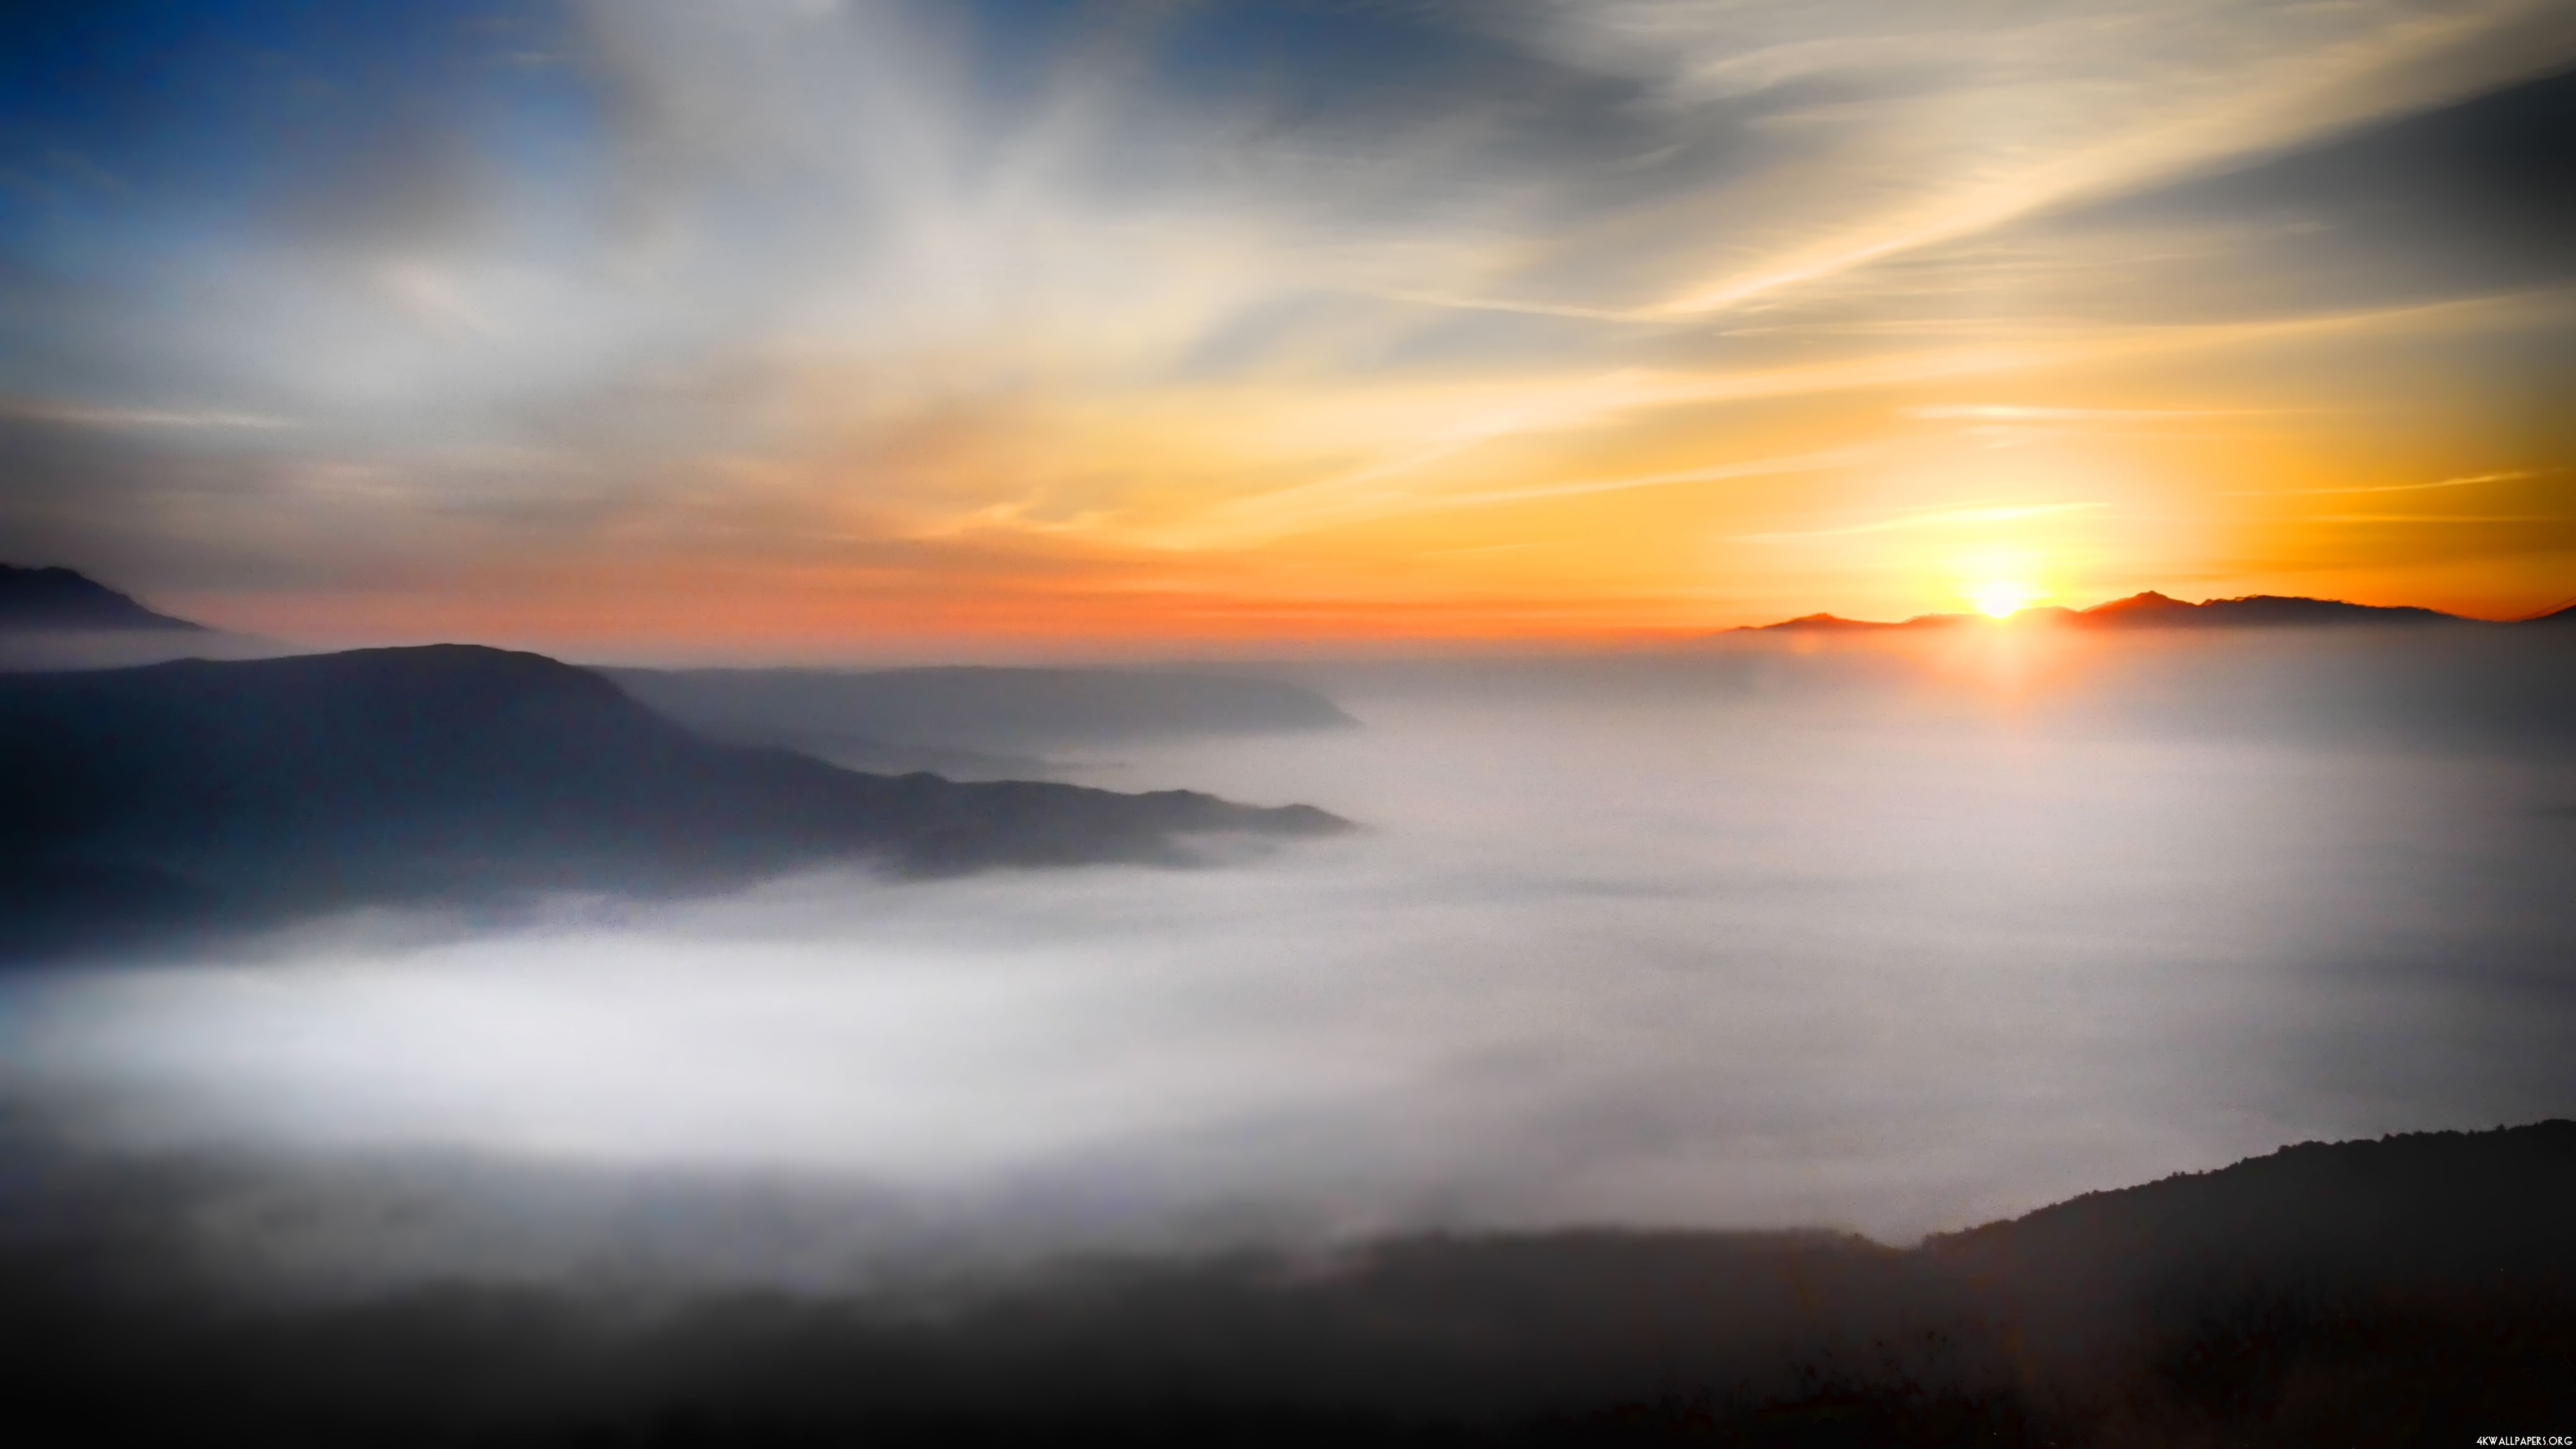 Sunset Above Clouds Wallpaper - Above The Clouds 4k - HD Wallpaper 